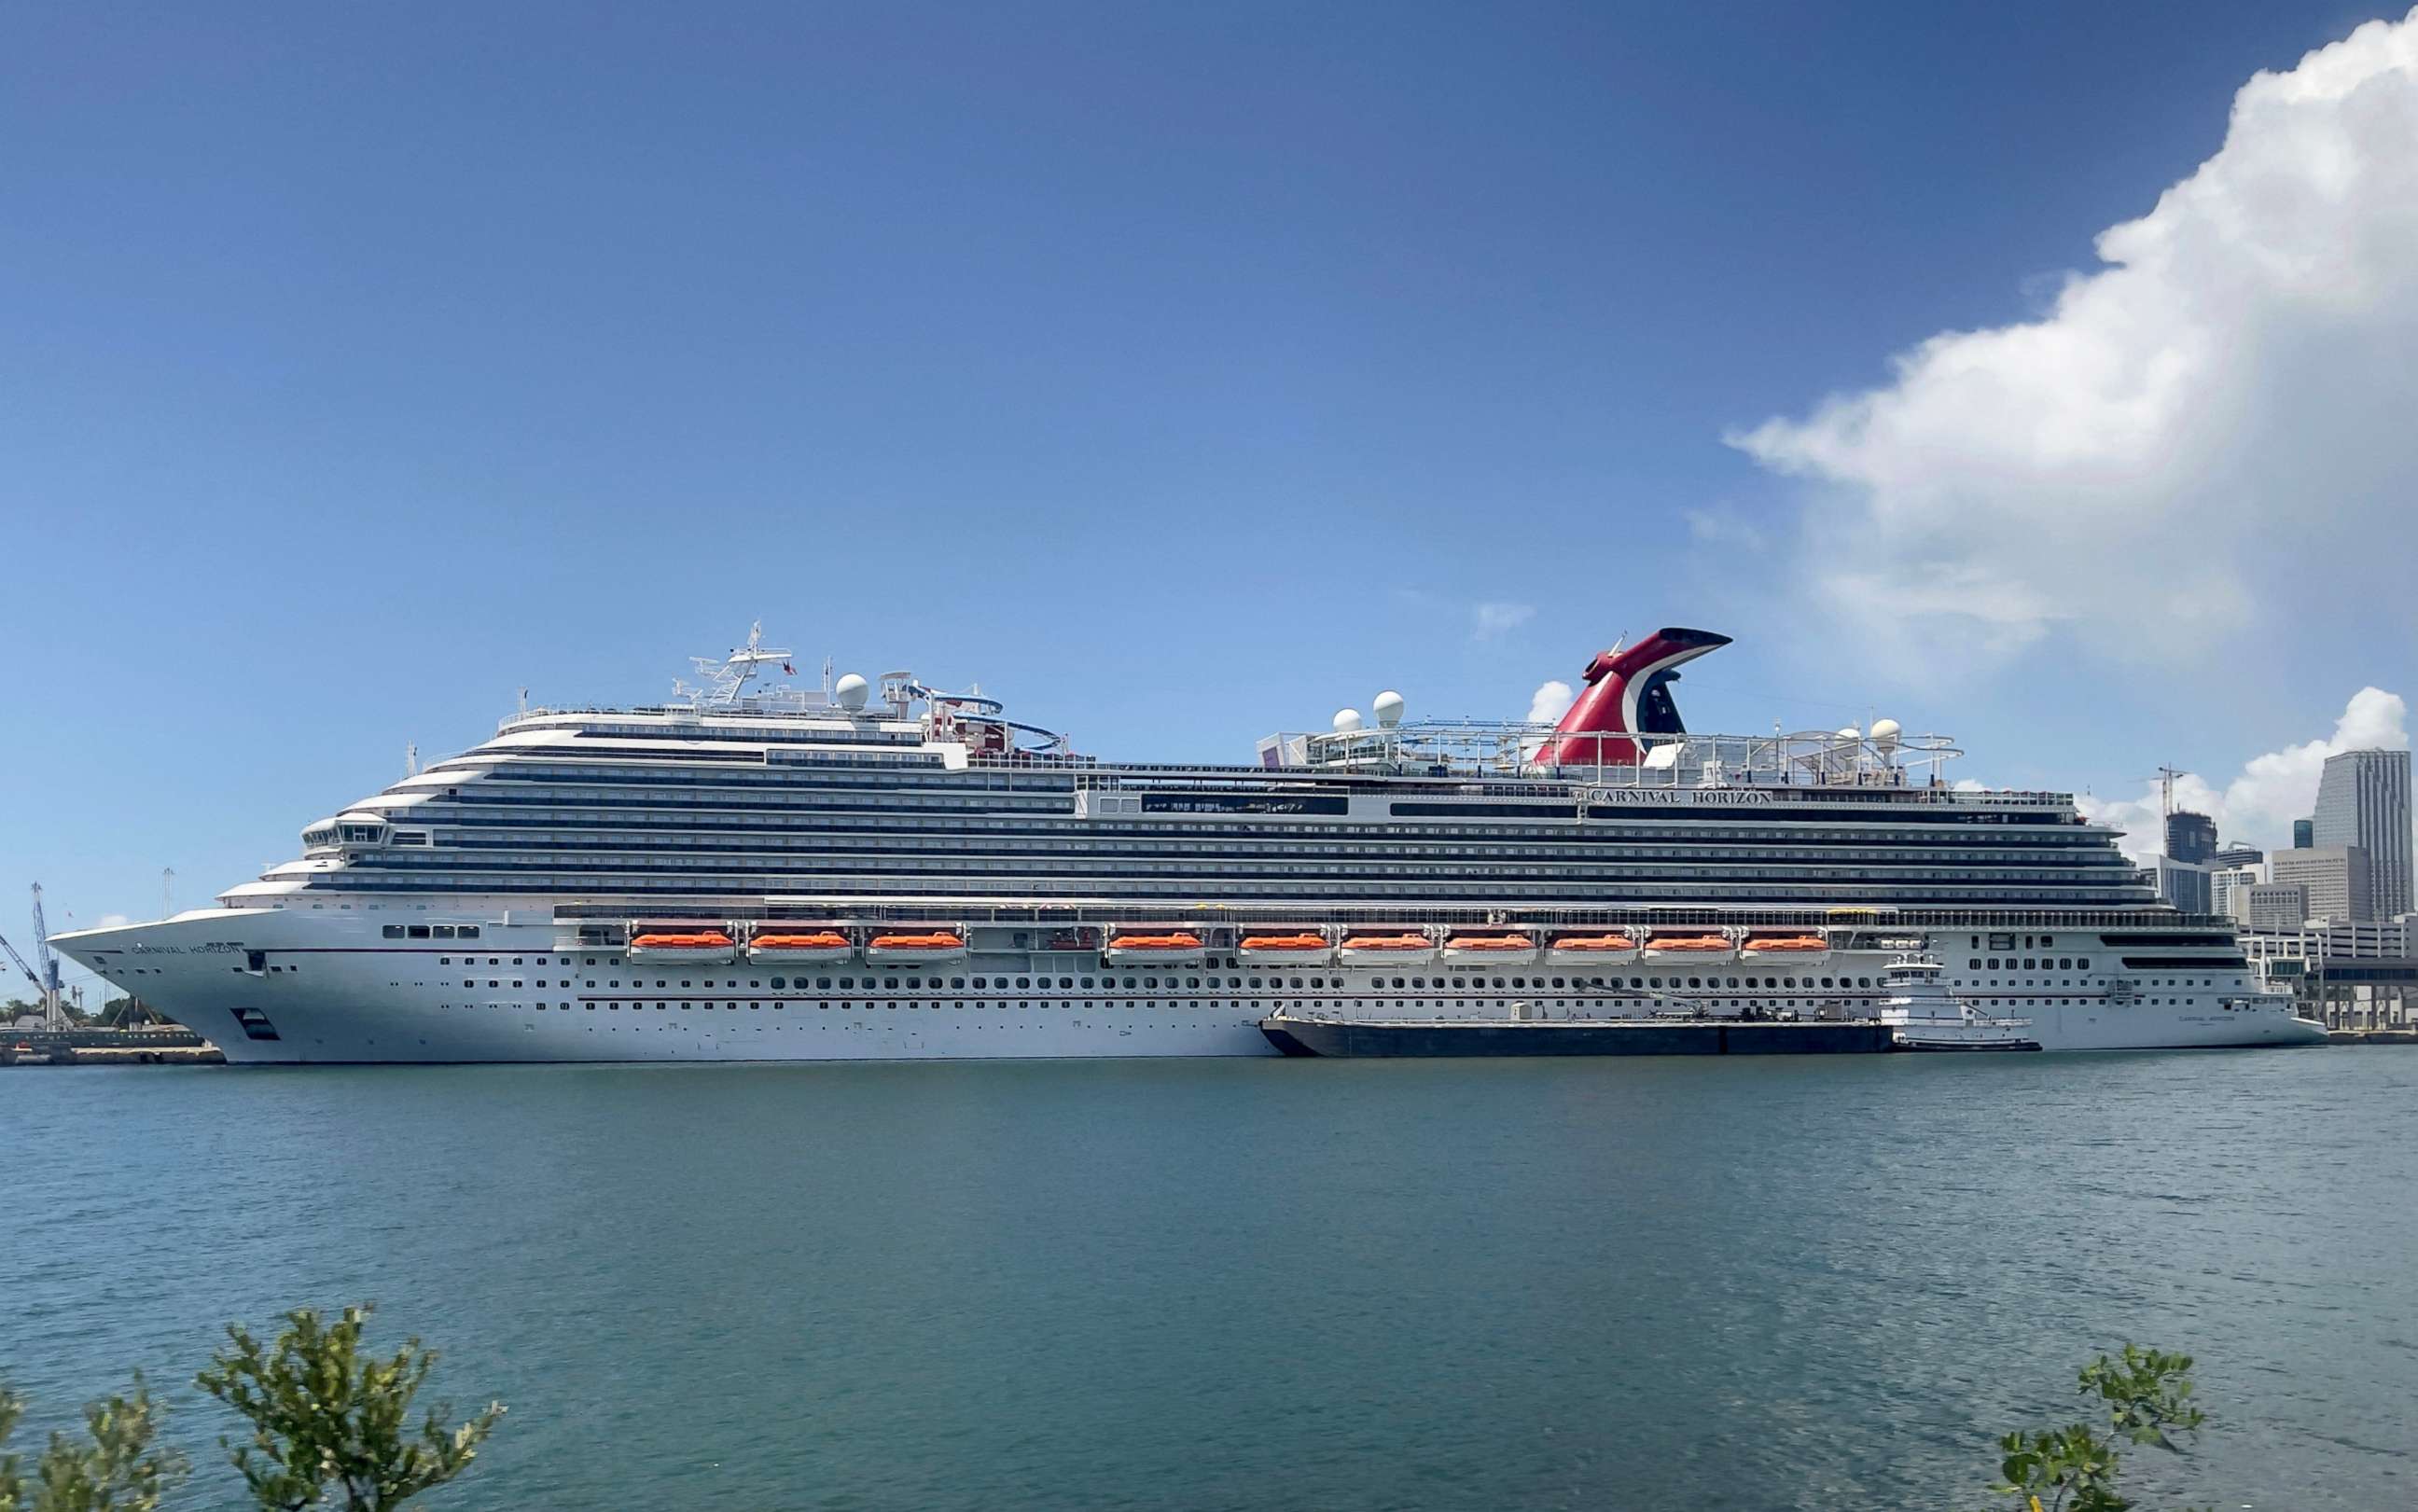 PHOTO: The Carnival Horizon cruise ship is seen moored in the Port of Miami, Aug. 1, 2021.